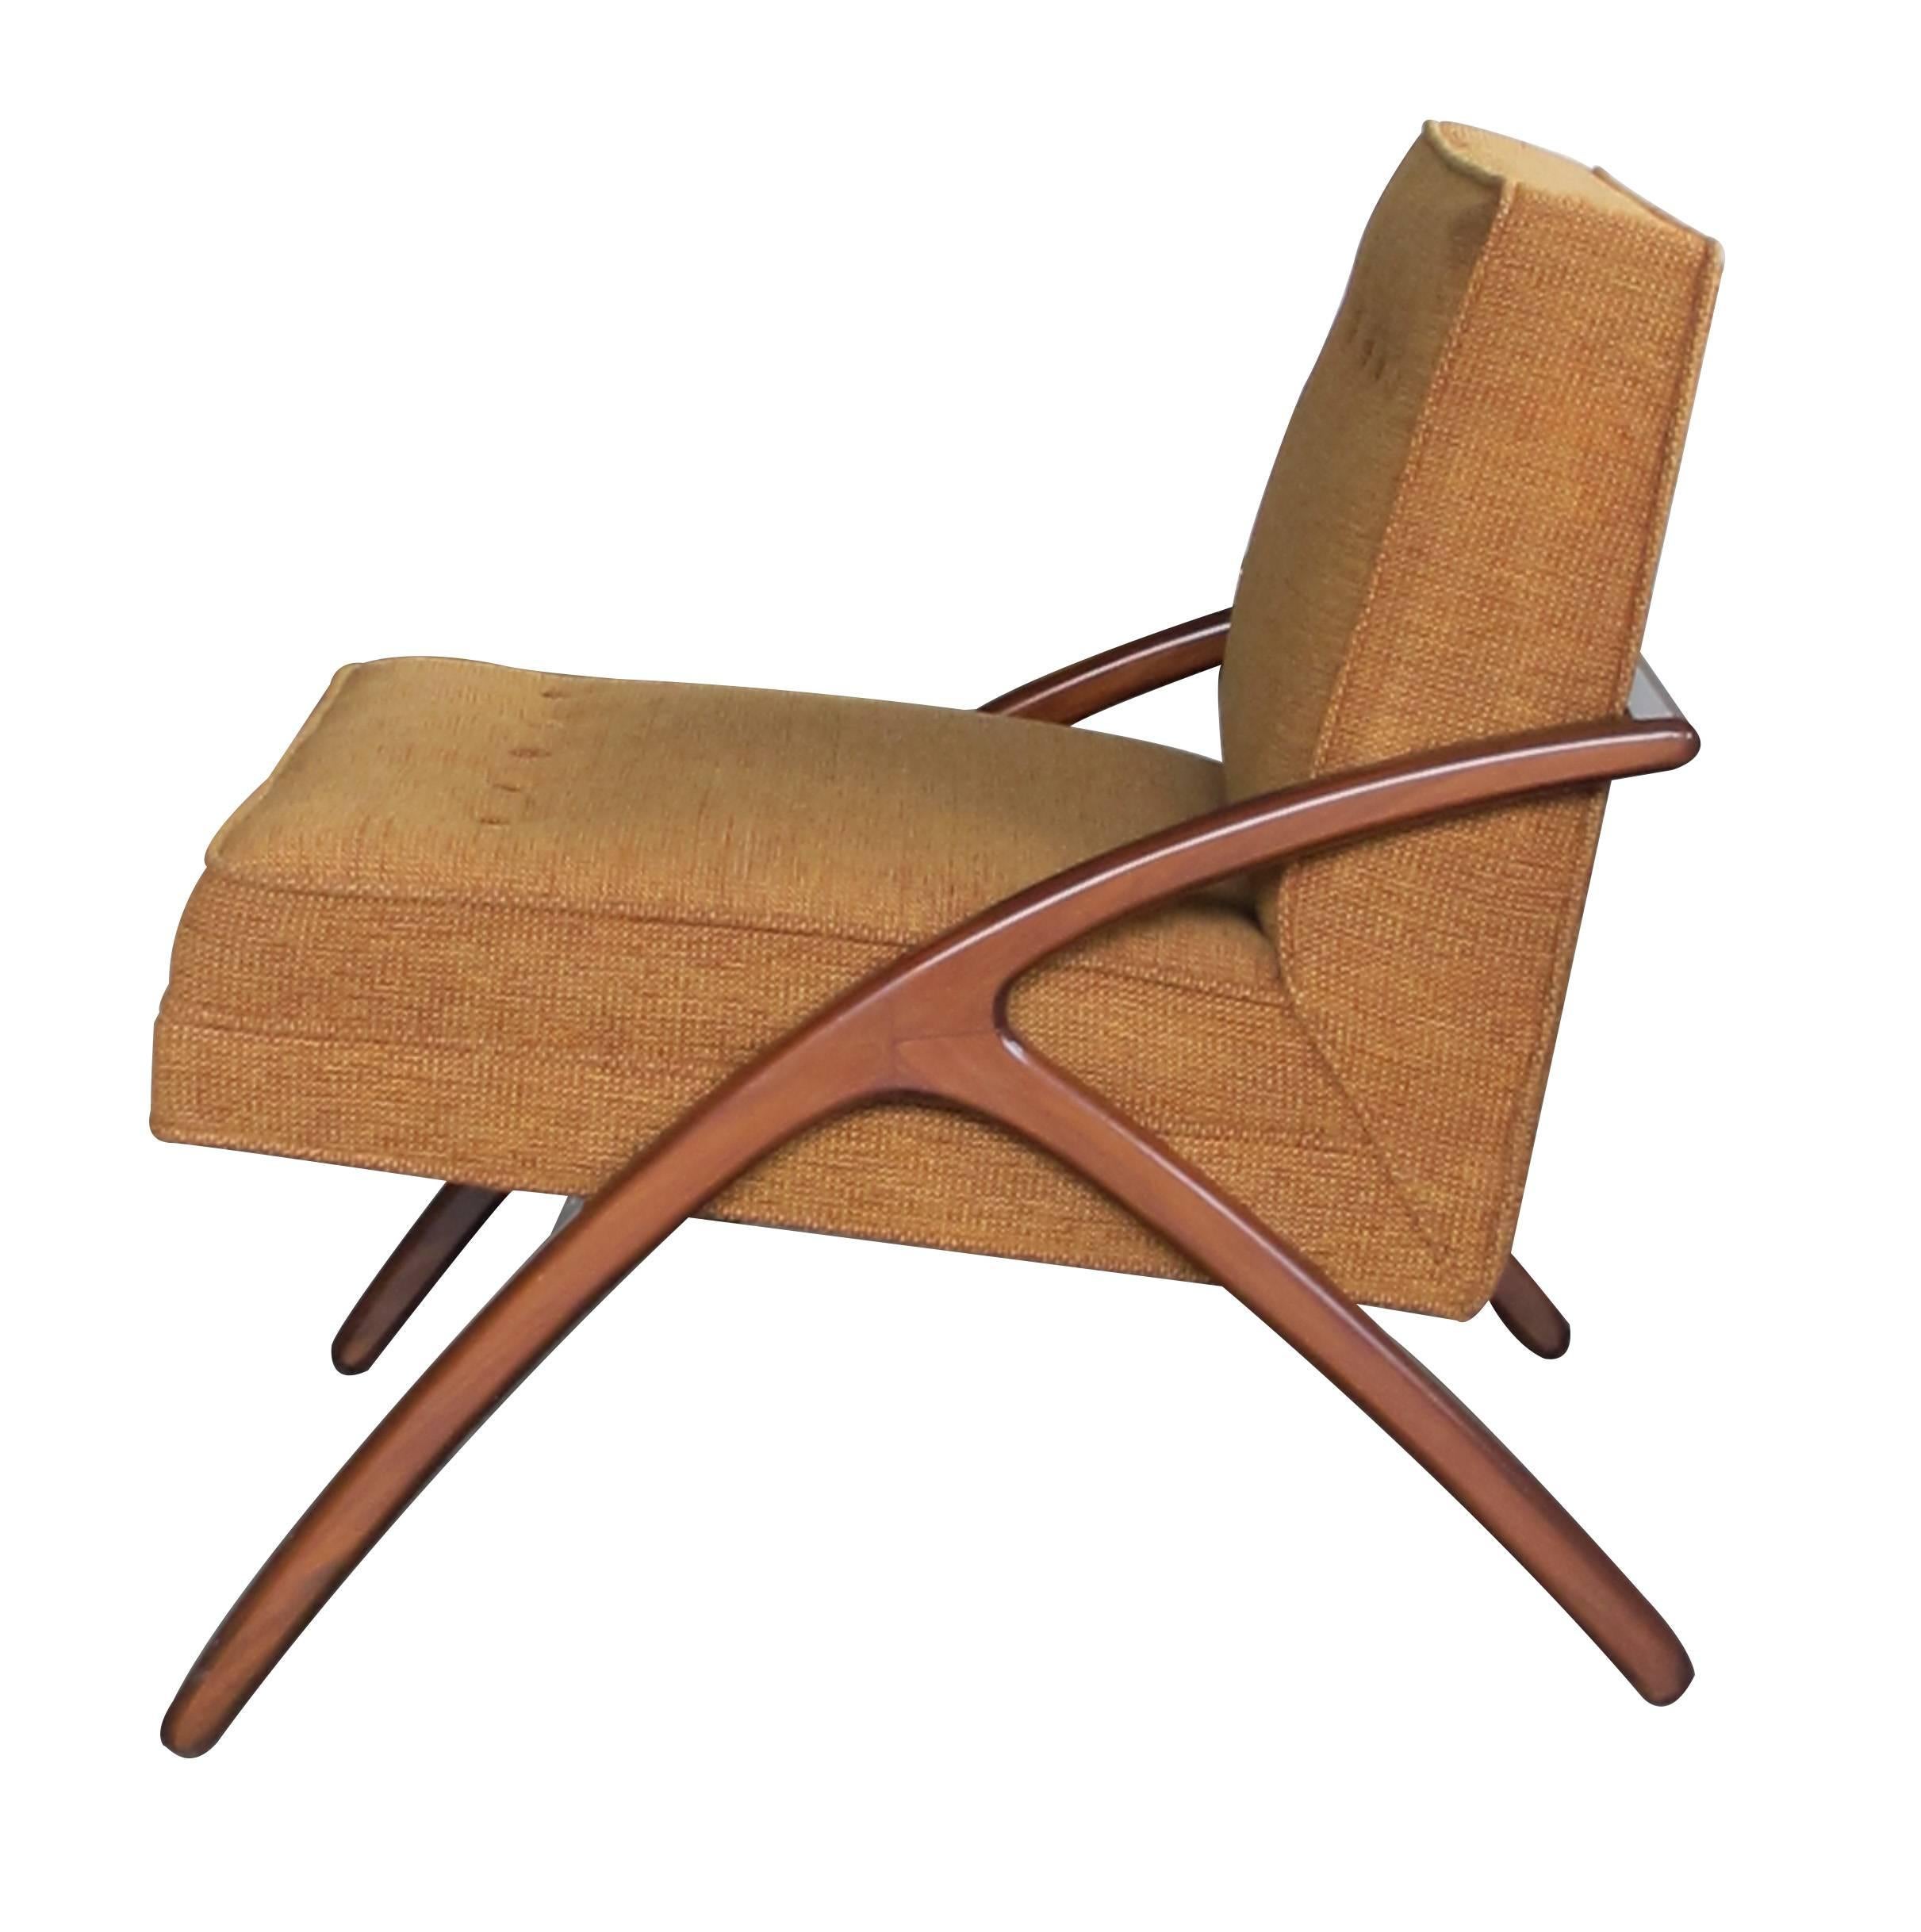 With elegant lines, each chair with upholstered back and seat resting on a graceful wooden frame with arching legs joined at the back; with splayed legs at the rear.